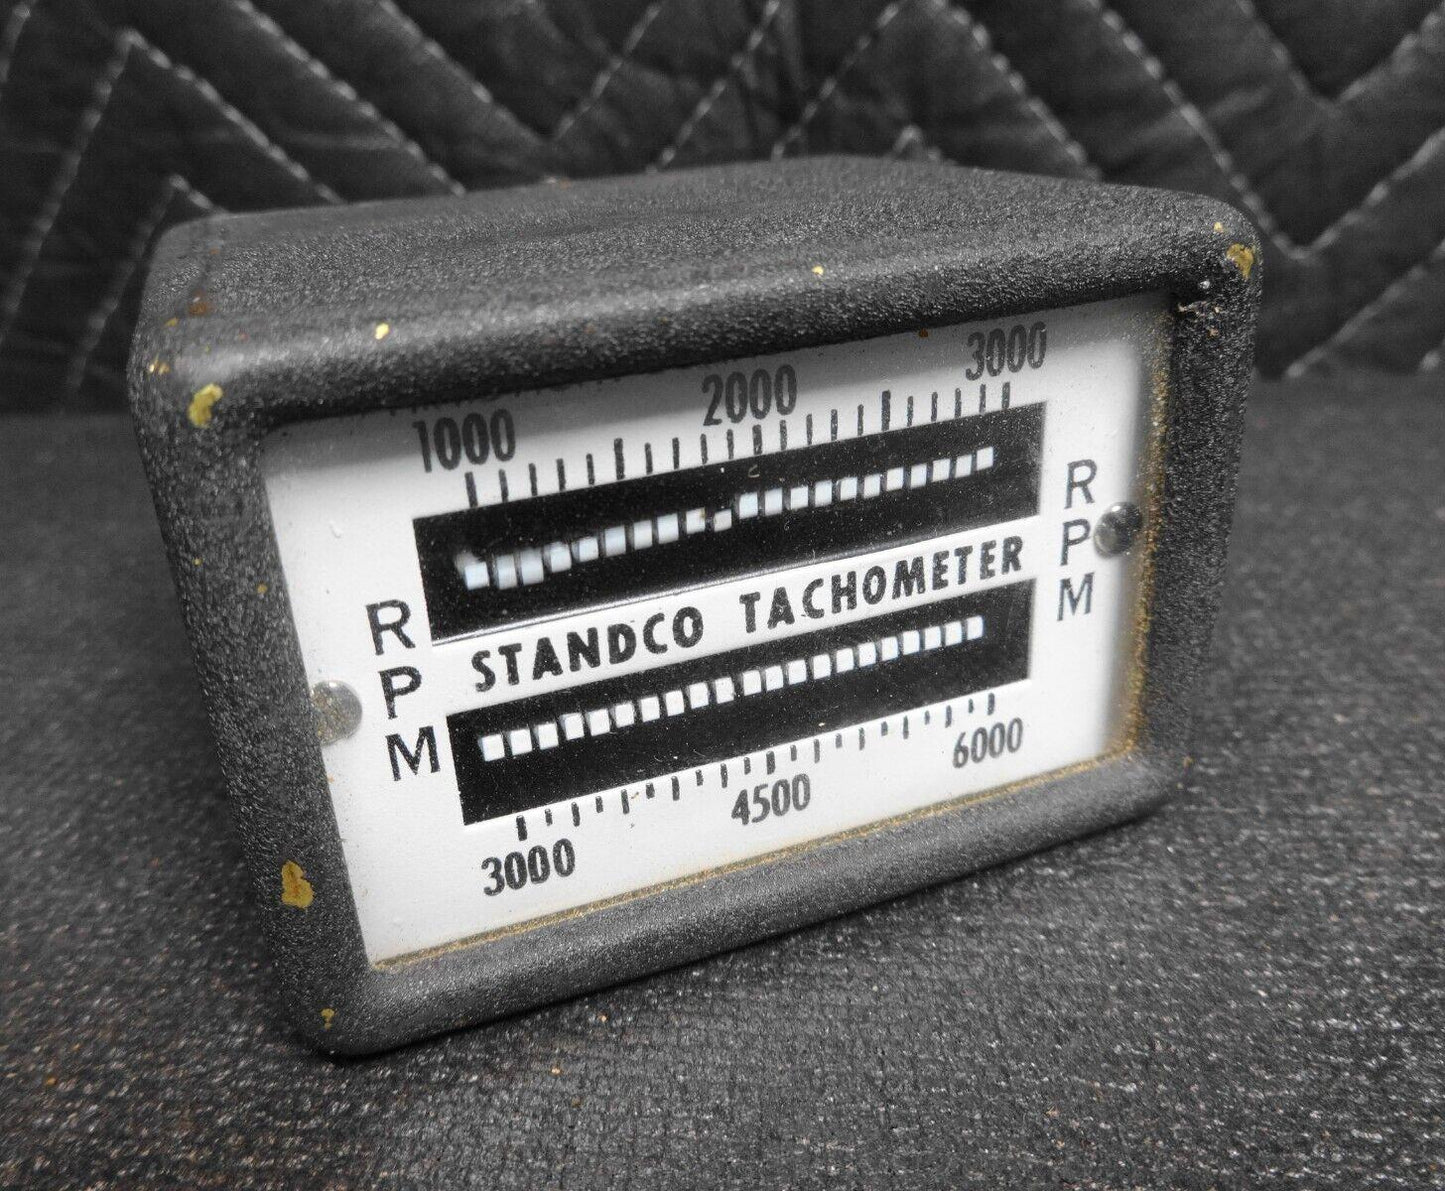 Vintage Standco Vibrating Reed Tachometer 3.5x3.25x2.75”